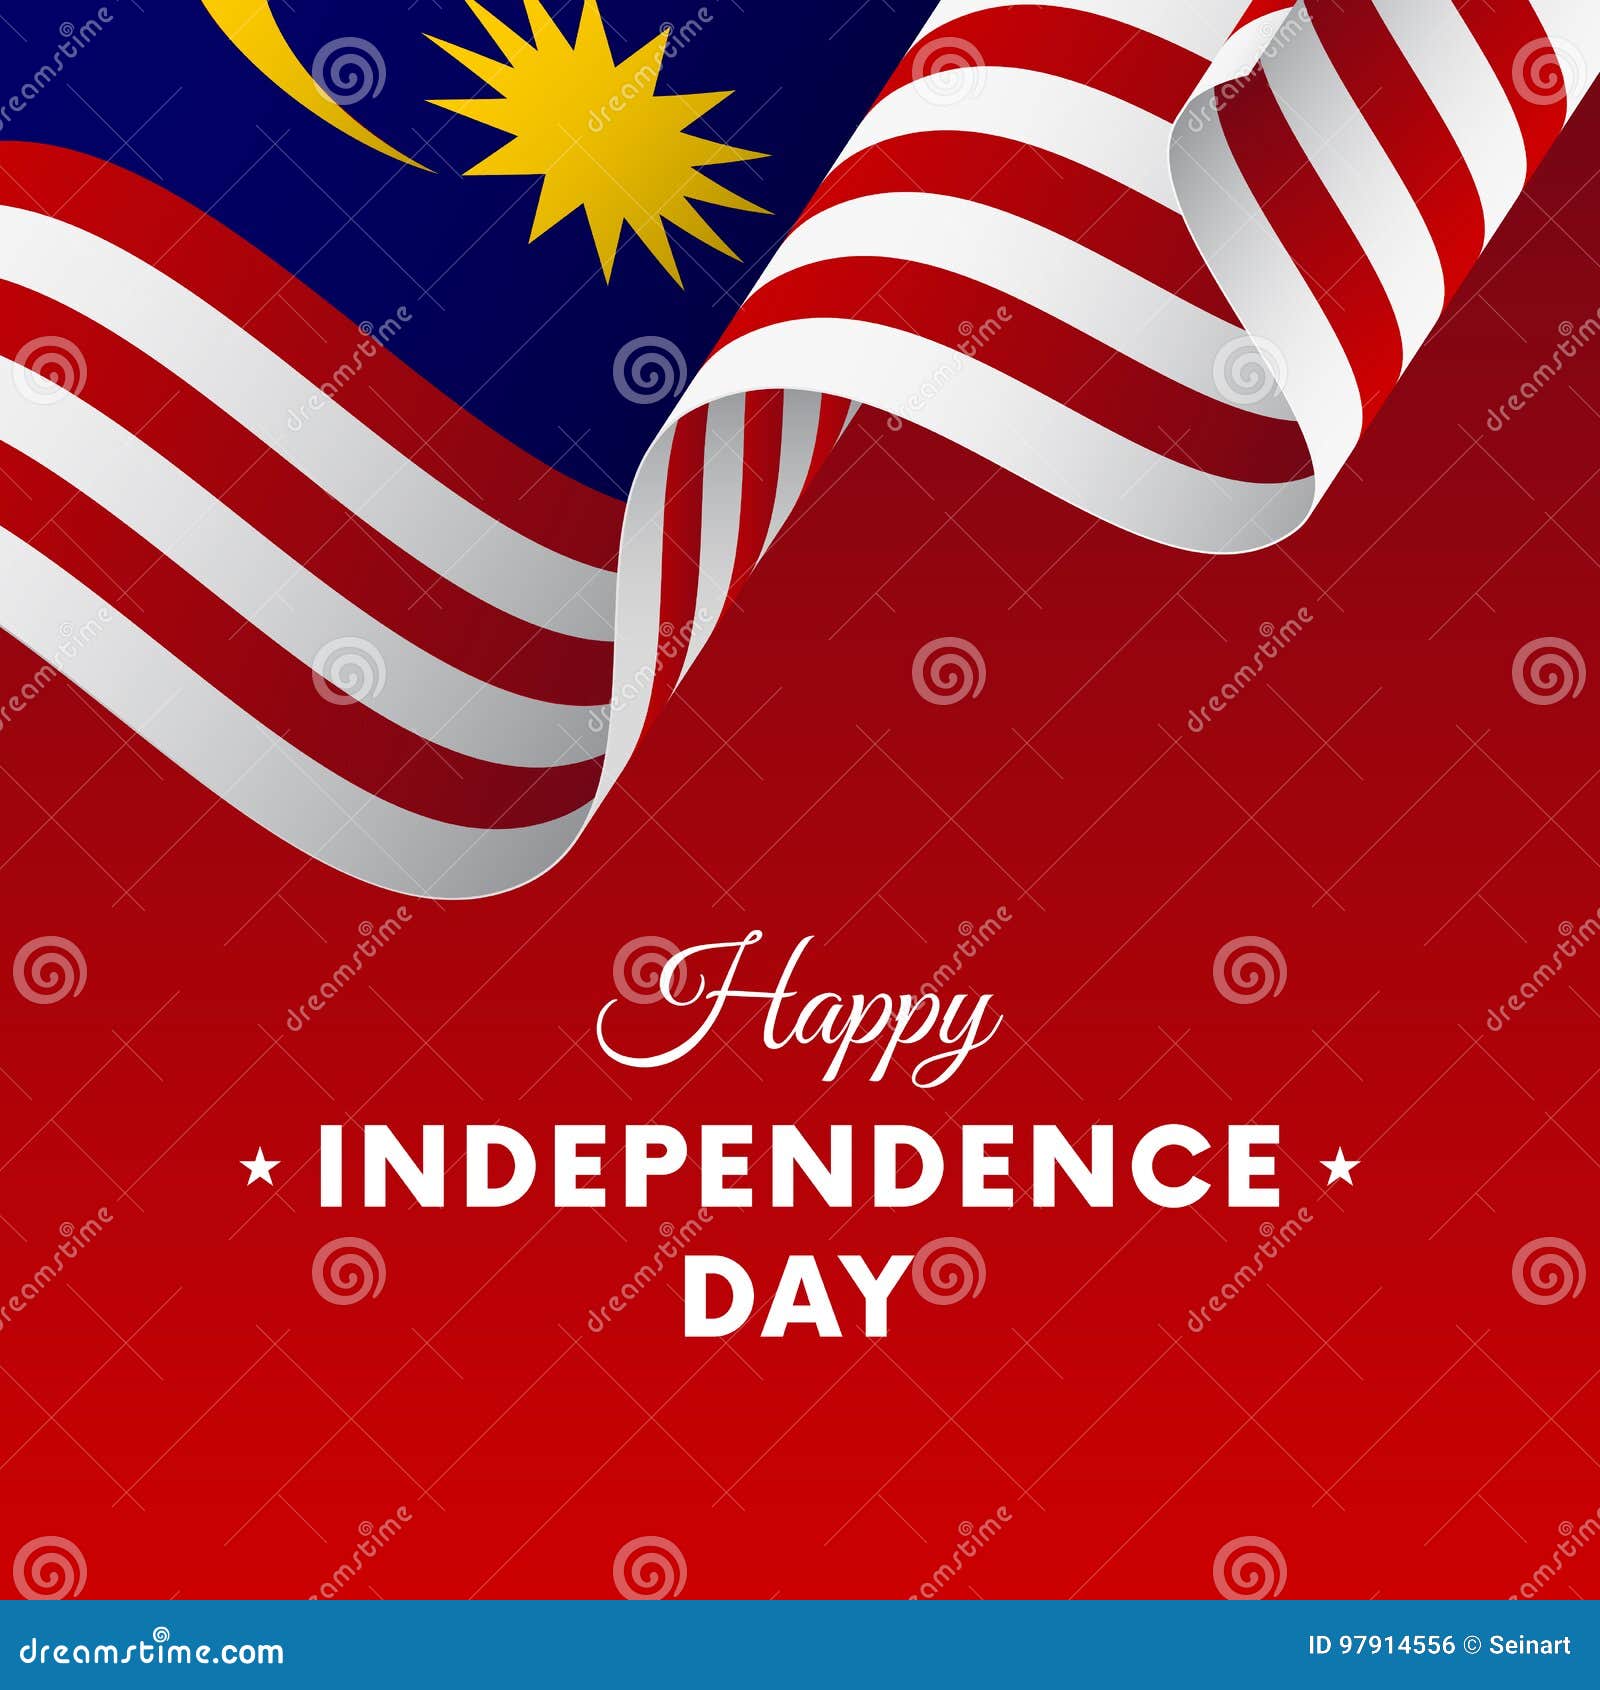 Happy independence day malaysia 2021